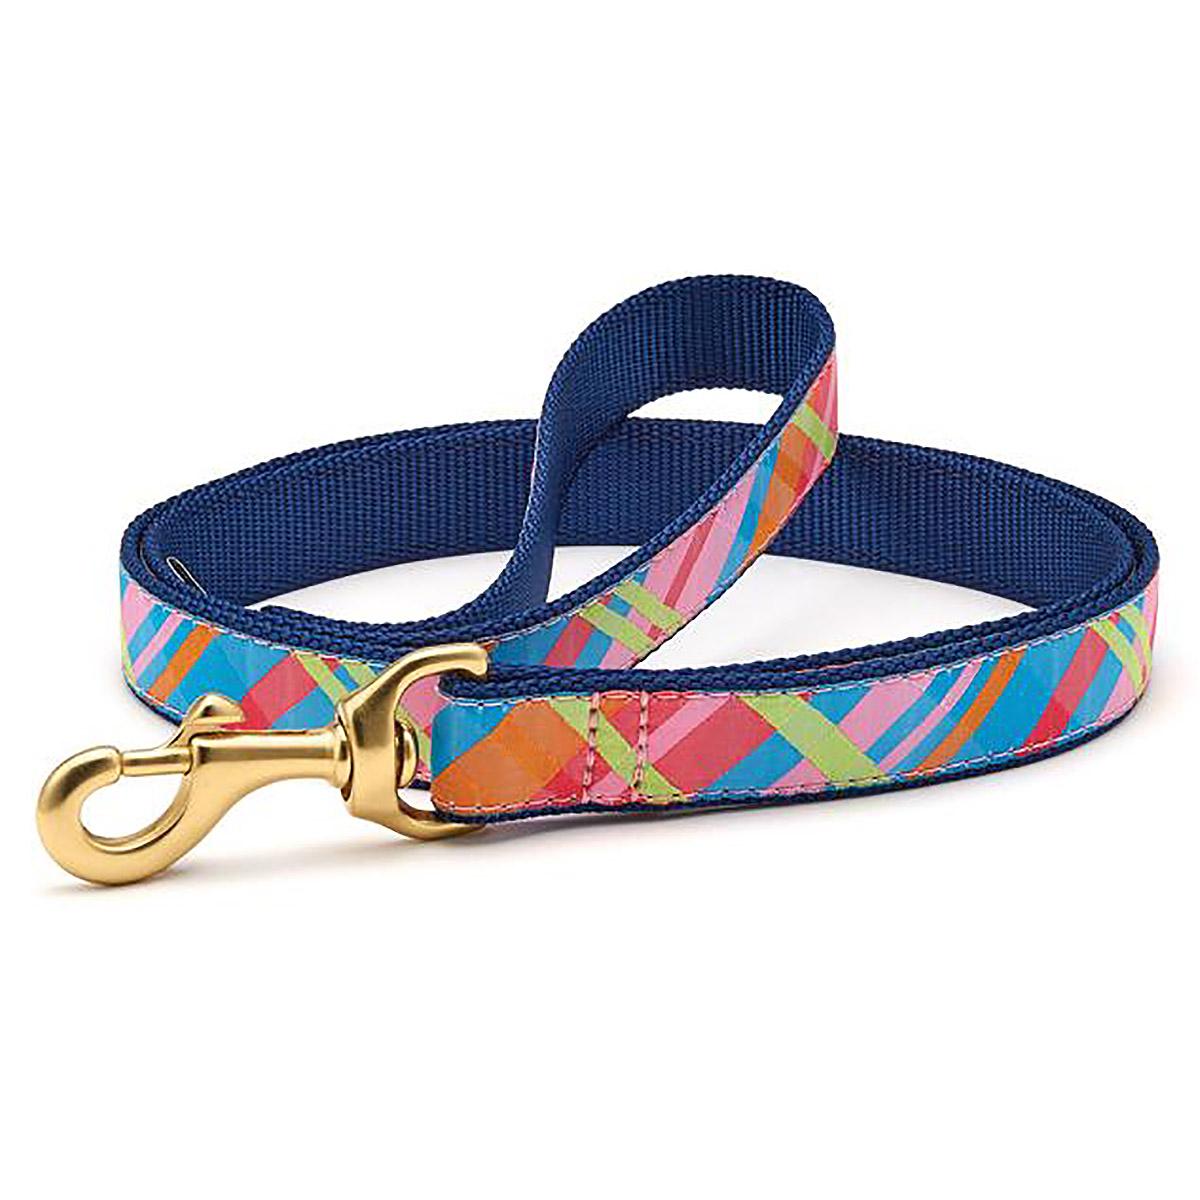 Pink Madras Dog Leash by Up Country